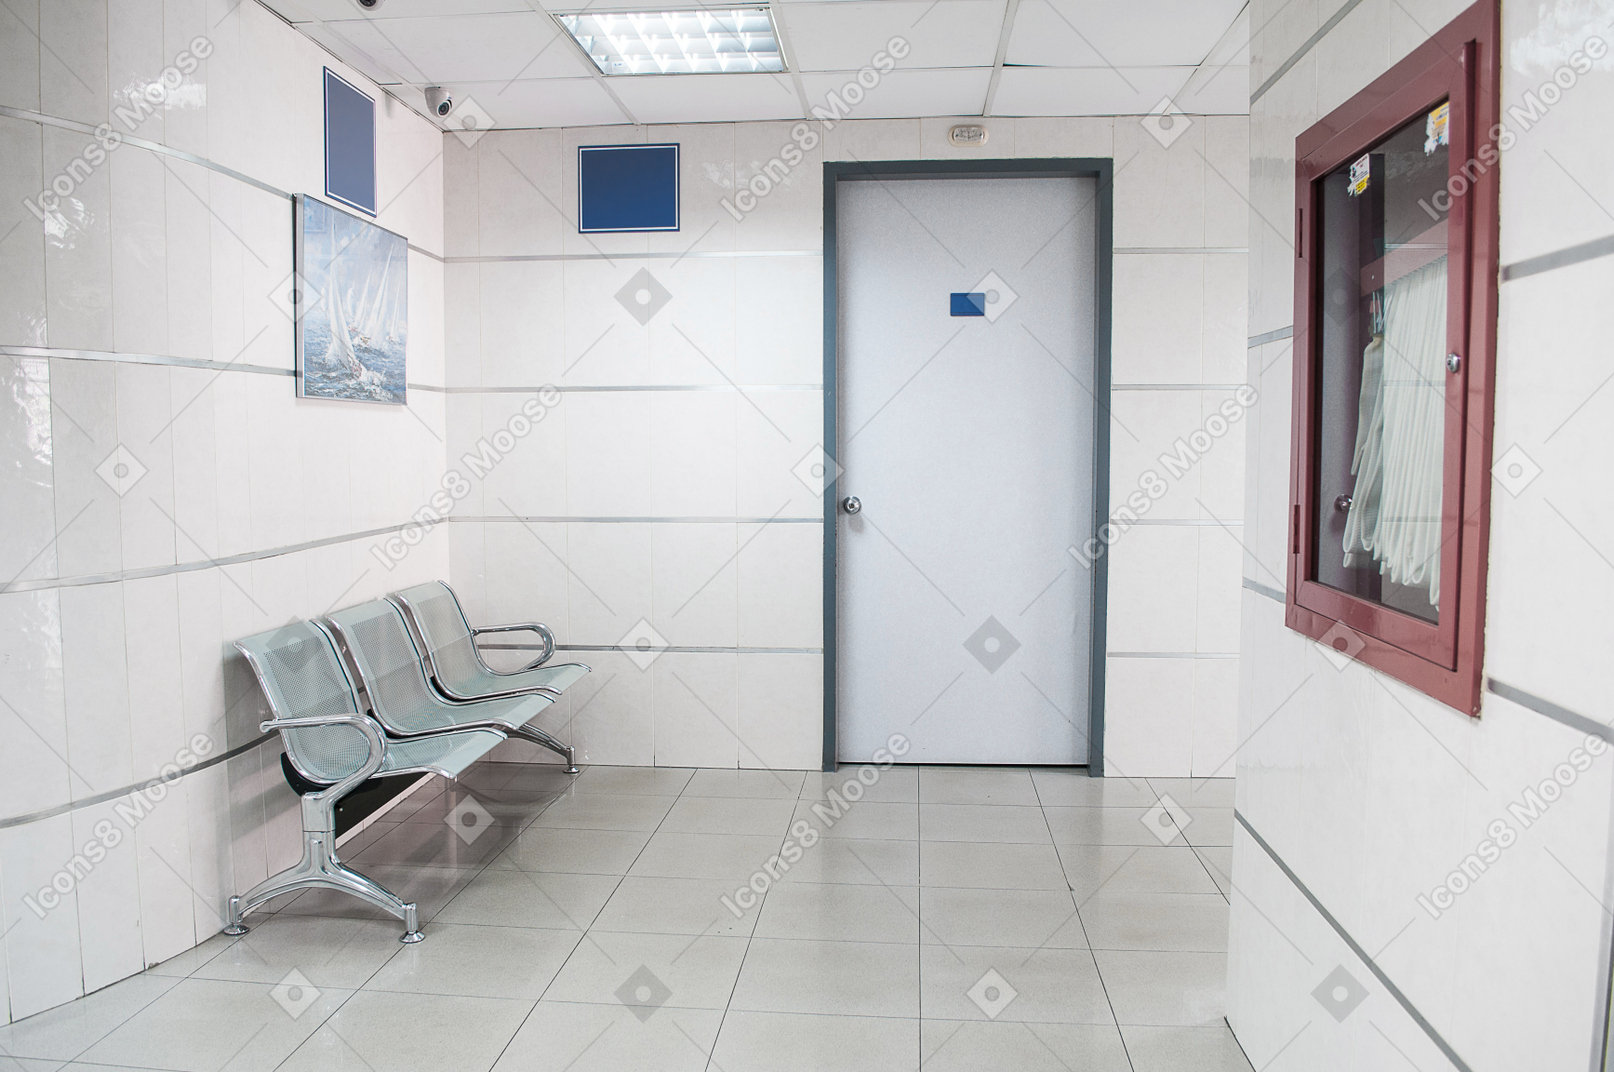 Hospitral waiting room